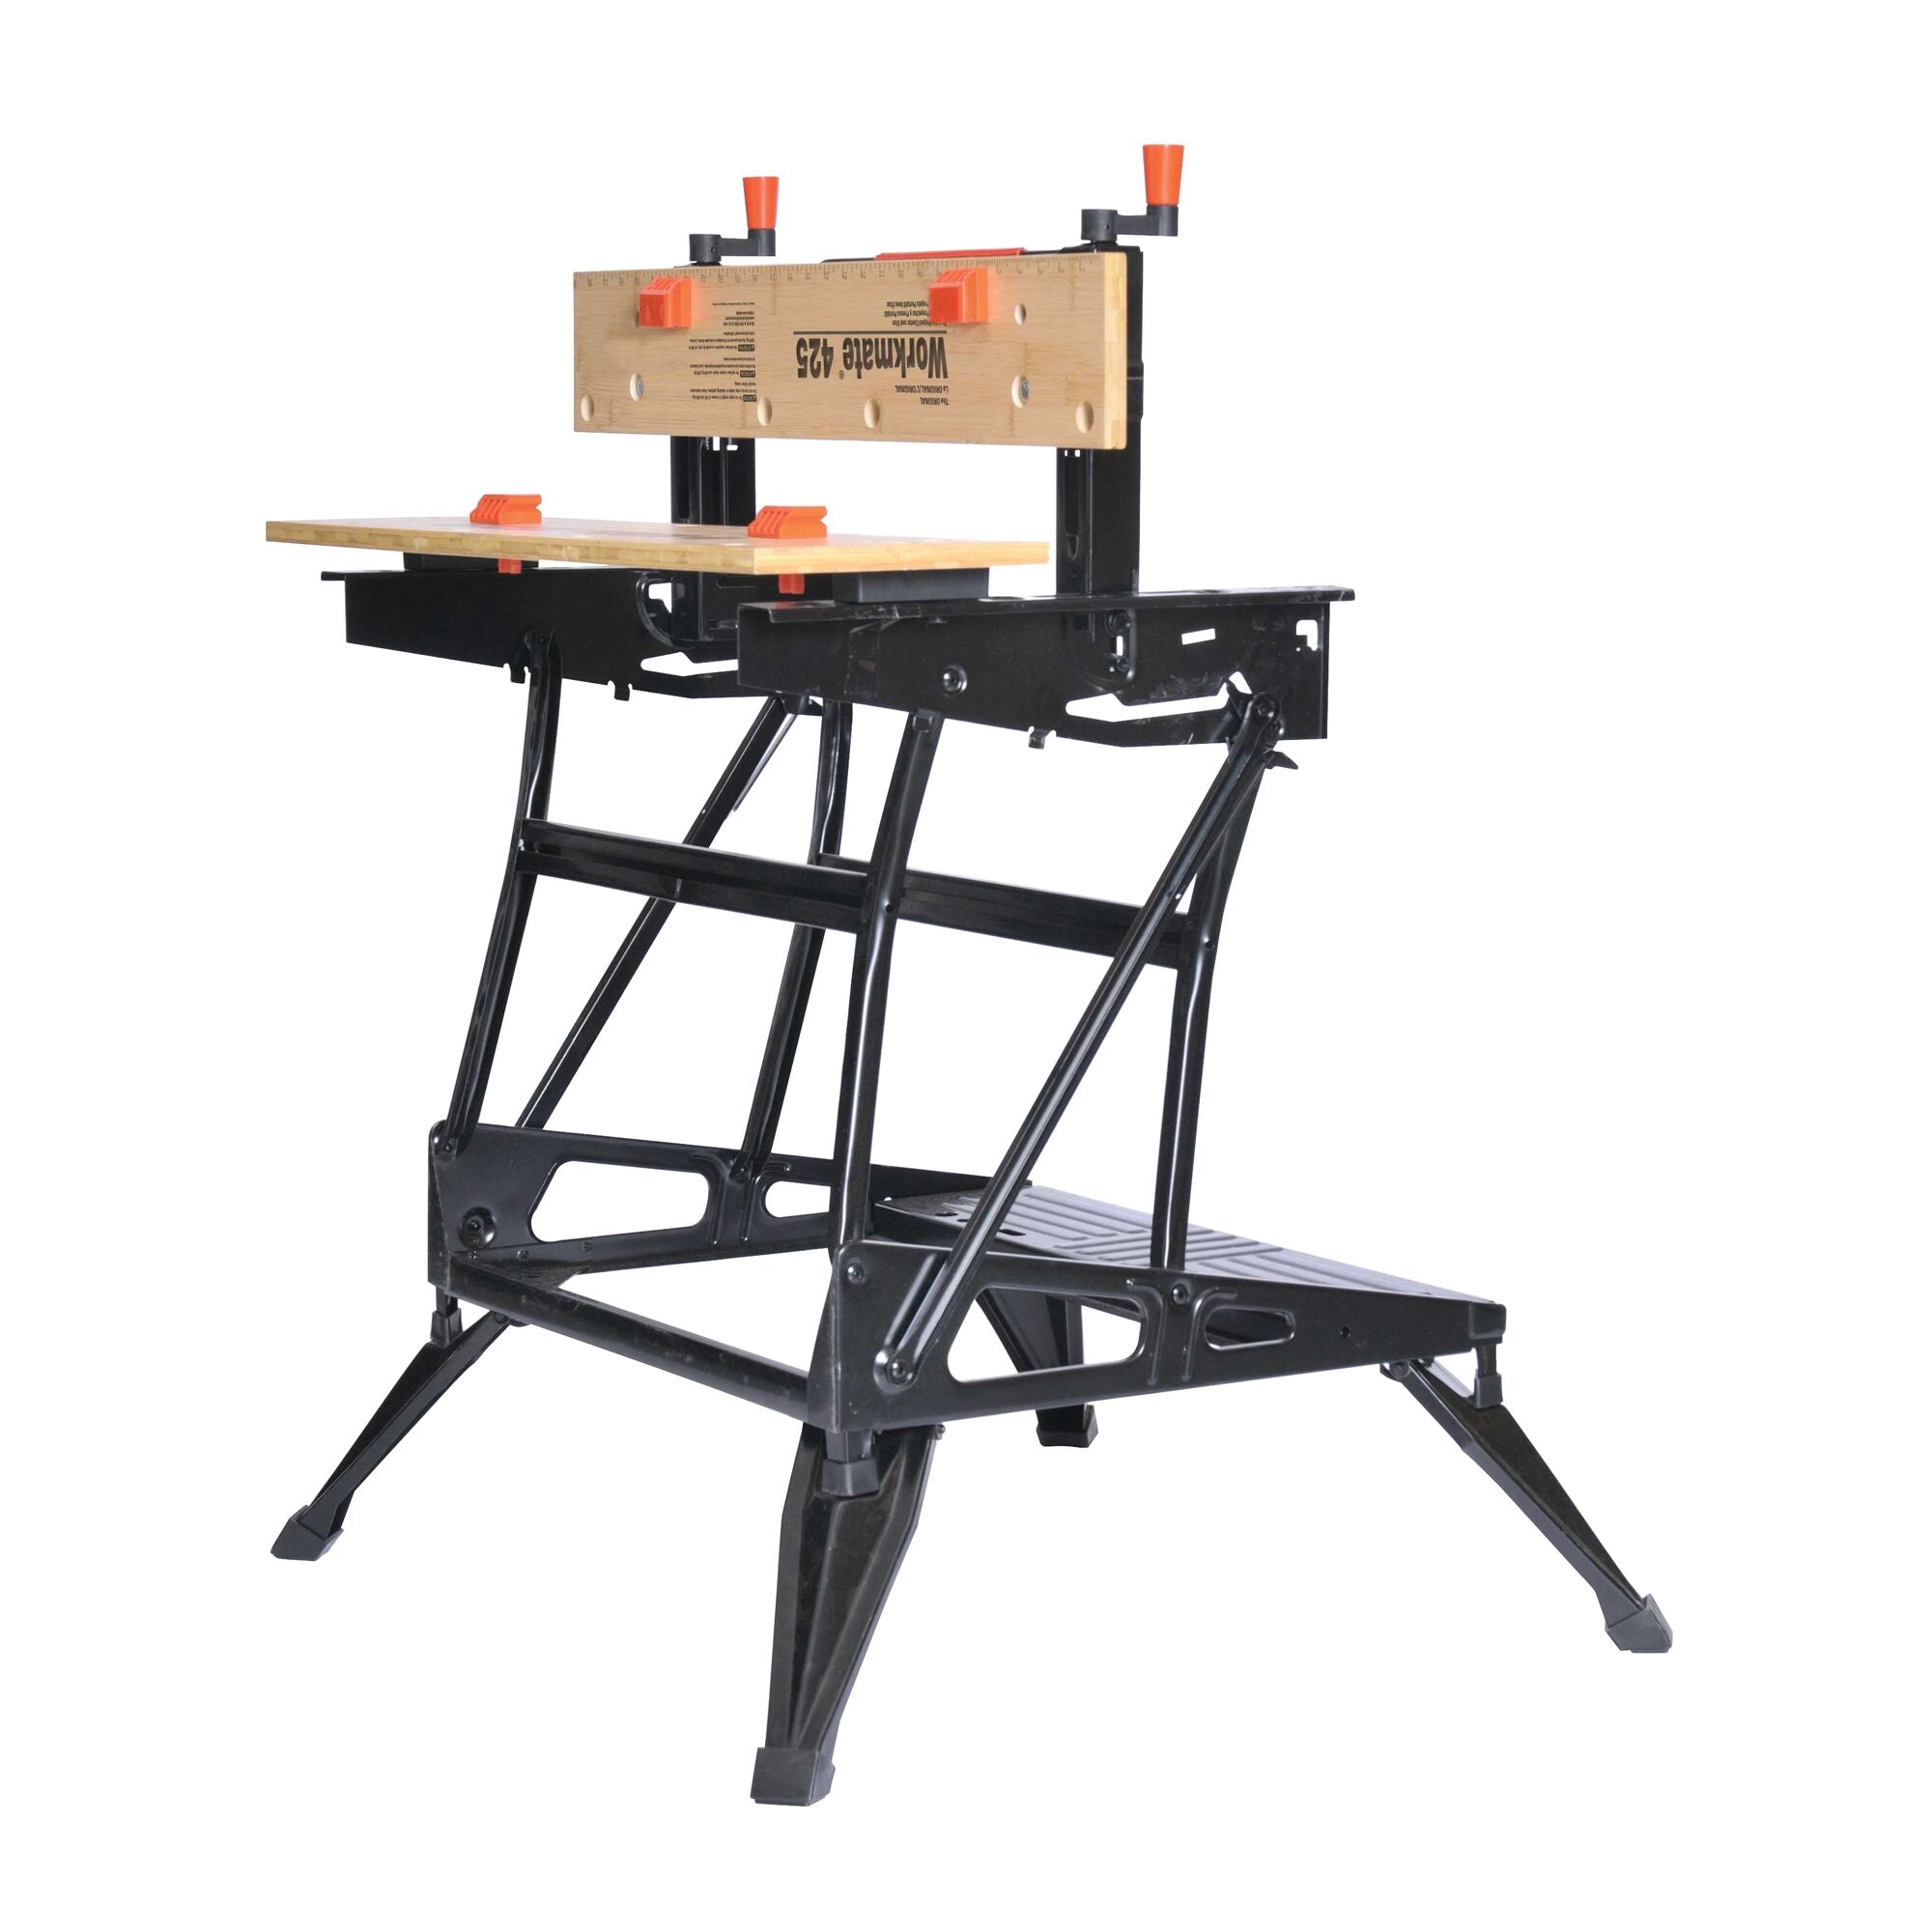 Honest Review of Workmate 425 & Assembly of Black & Decker's Workmate 425 Folding  Workbench 